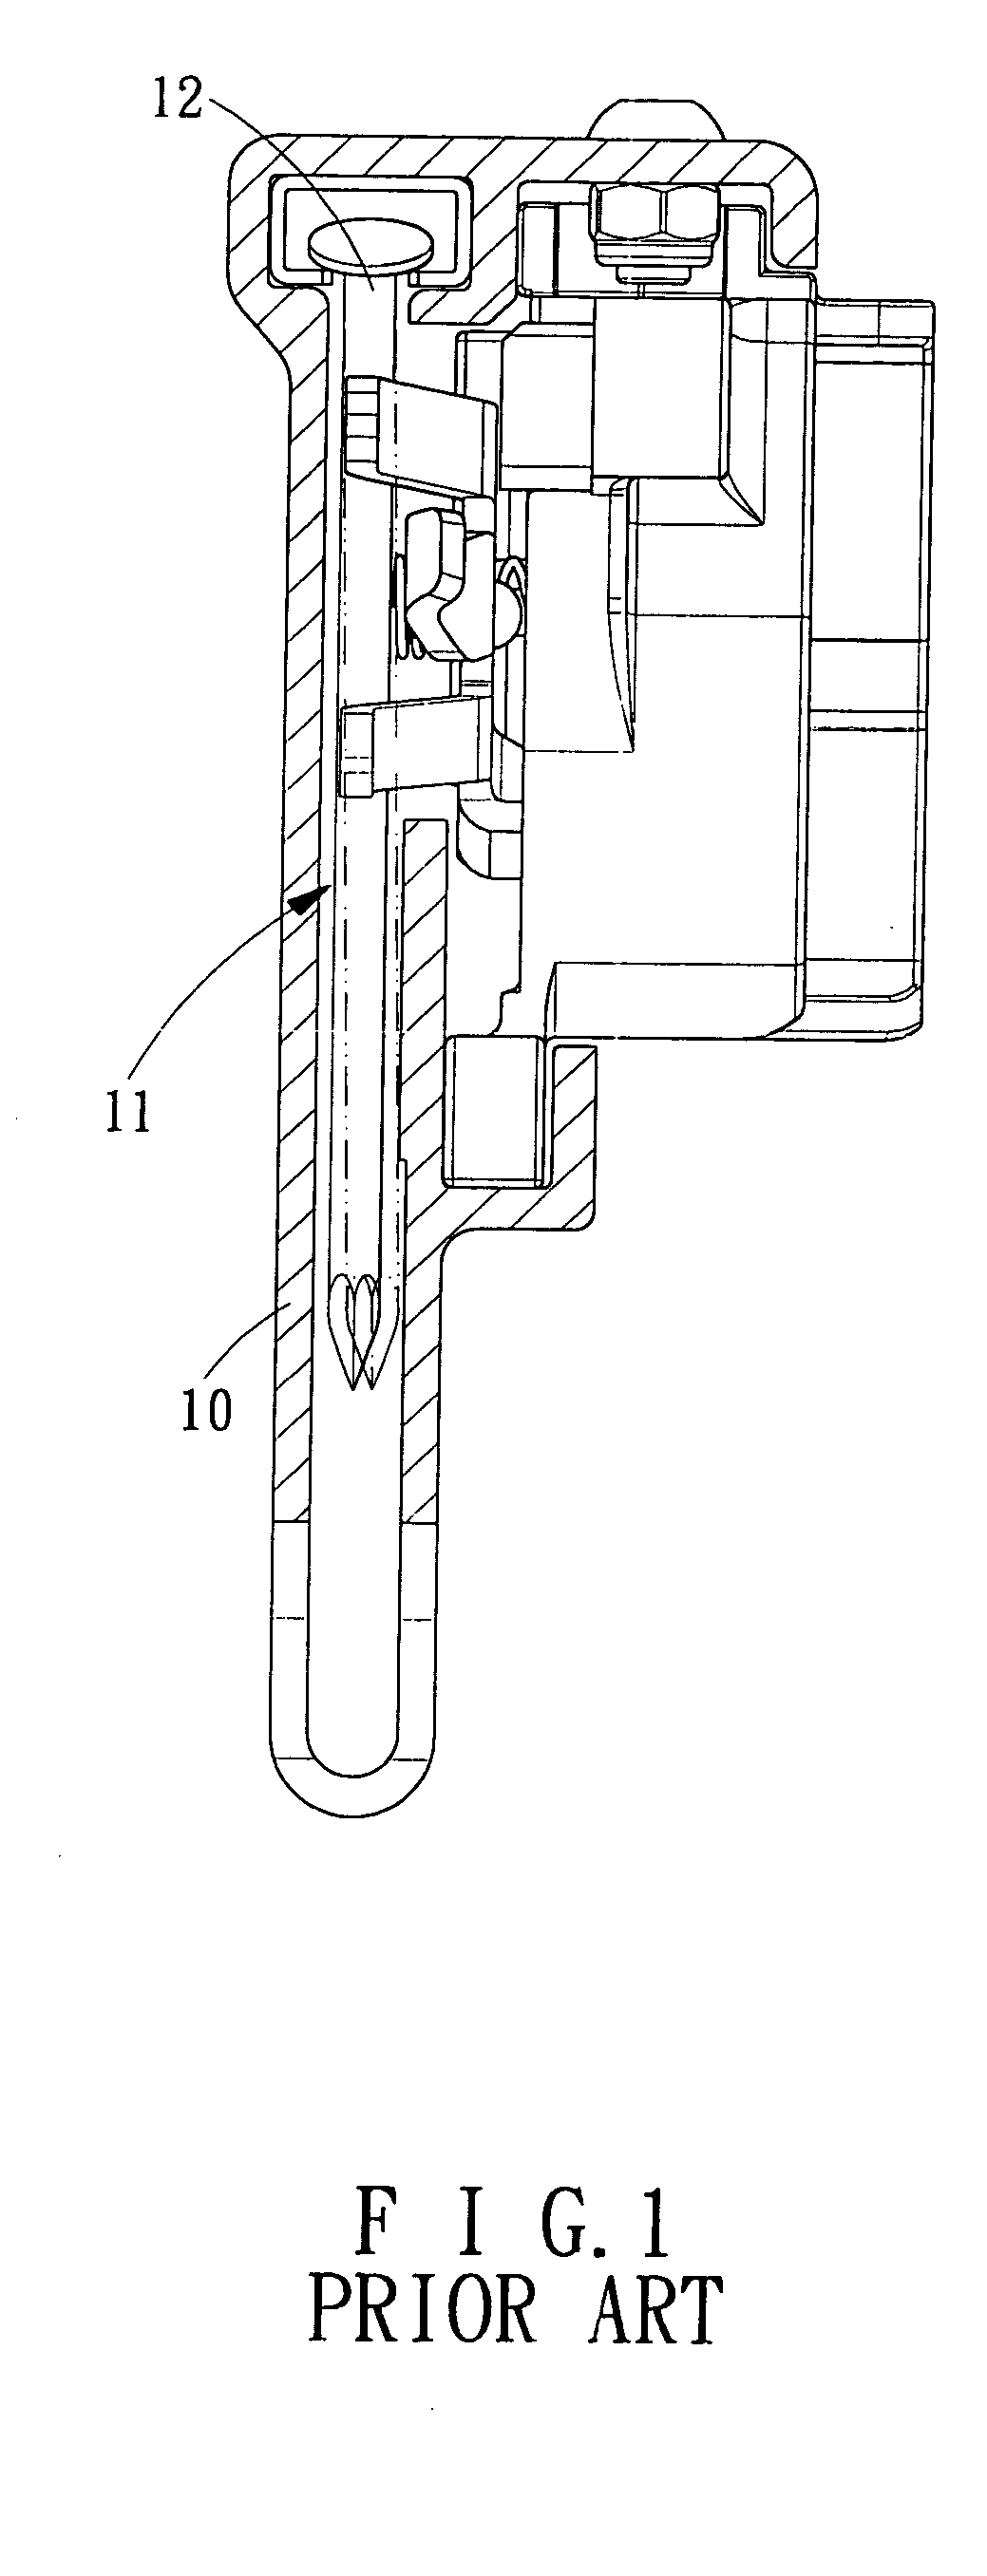 Apparatus for adjusting width of drive channel of nailer